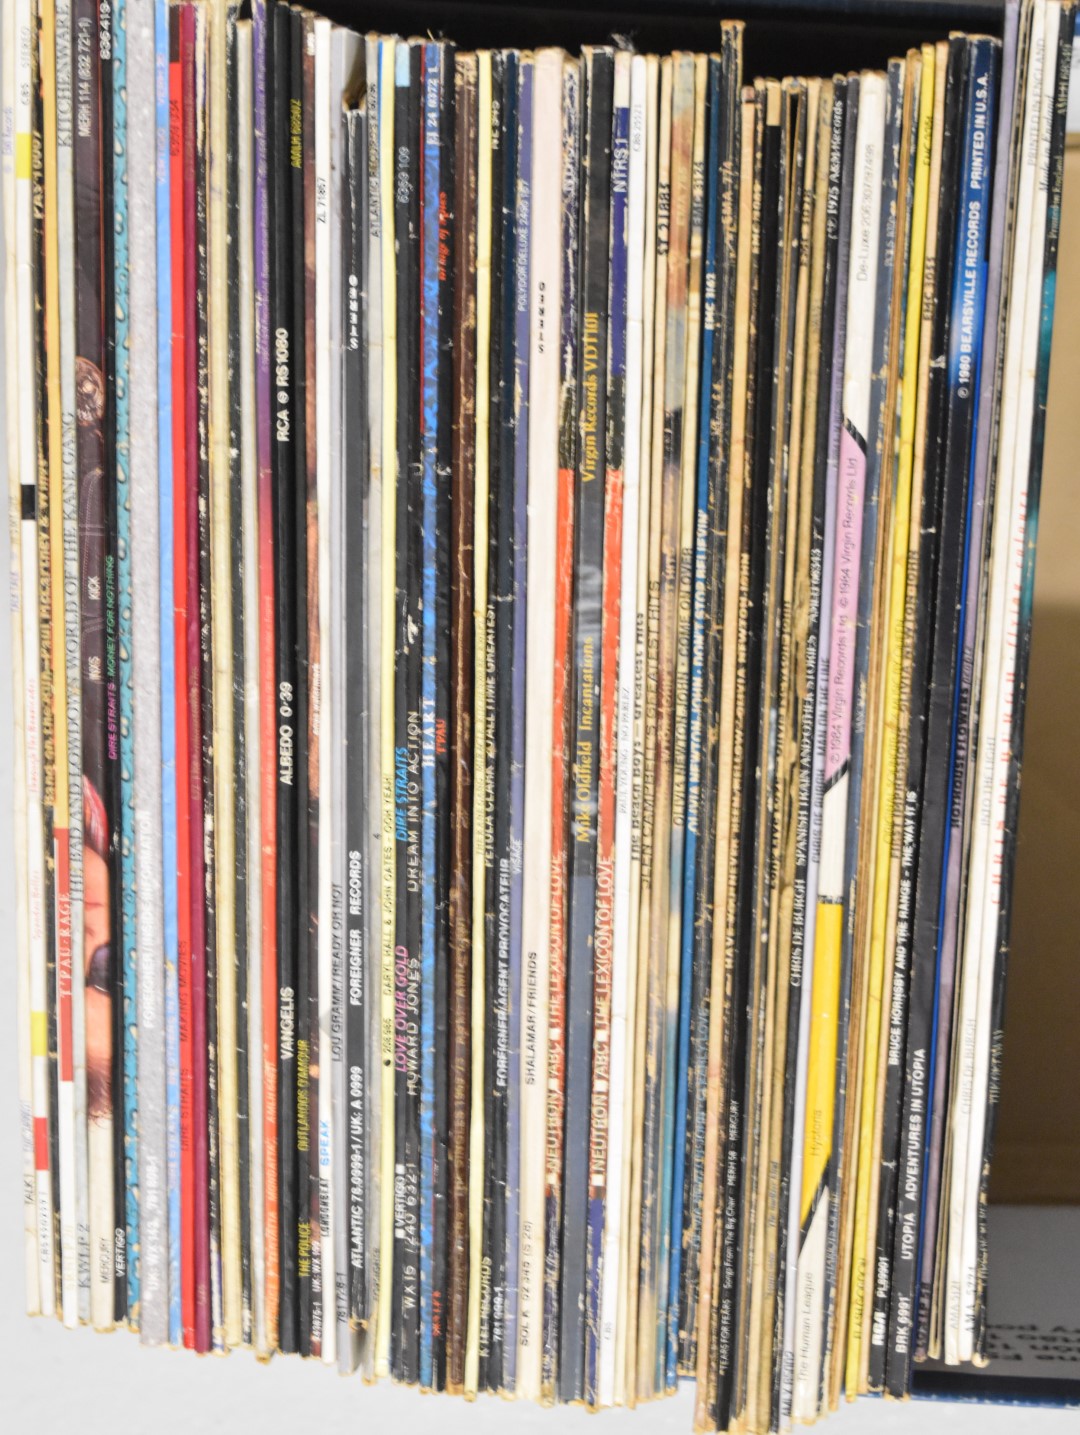 Approximately 62 Rock / Pop LPs including The Police, U2, Dire Straits, Peter Gabriel, Foreigner, - Image 4 of 4